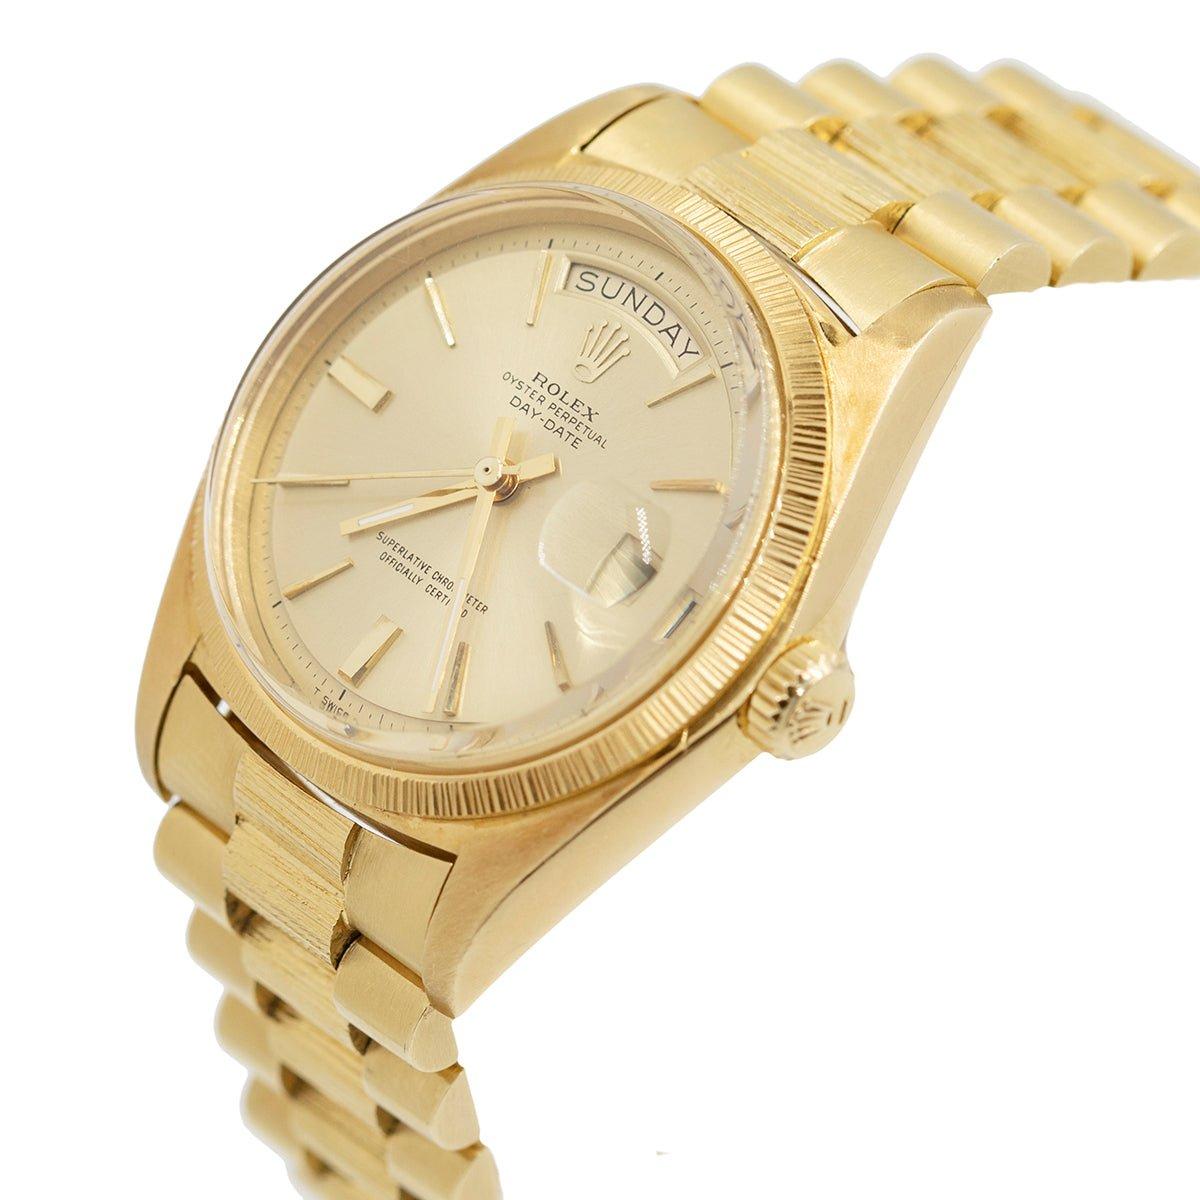 Rolex 1970s Day-Date wristwatch (ref. 1807), featuring a self-winding automatic movement; champagne-colored dial with applied gold hour markers; day-of-the-week aperture at 12 o'clock; date aperture at 3 o'clock; center seconds hand; and 36mm, 18k